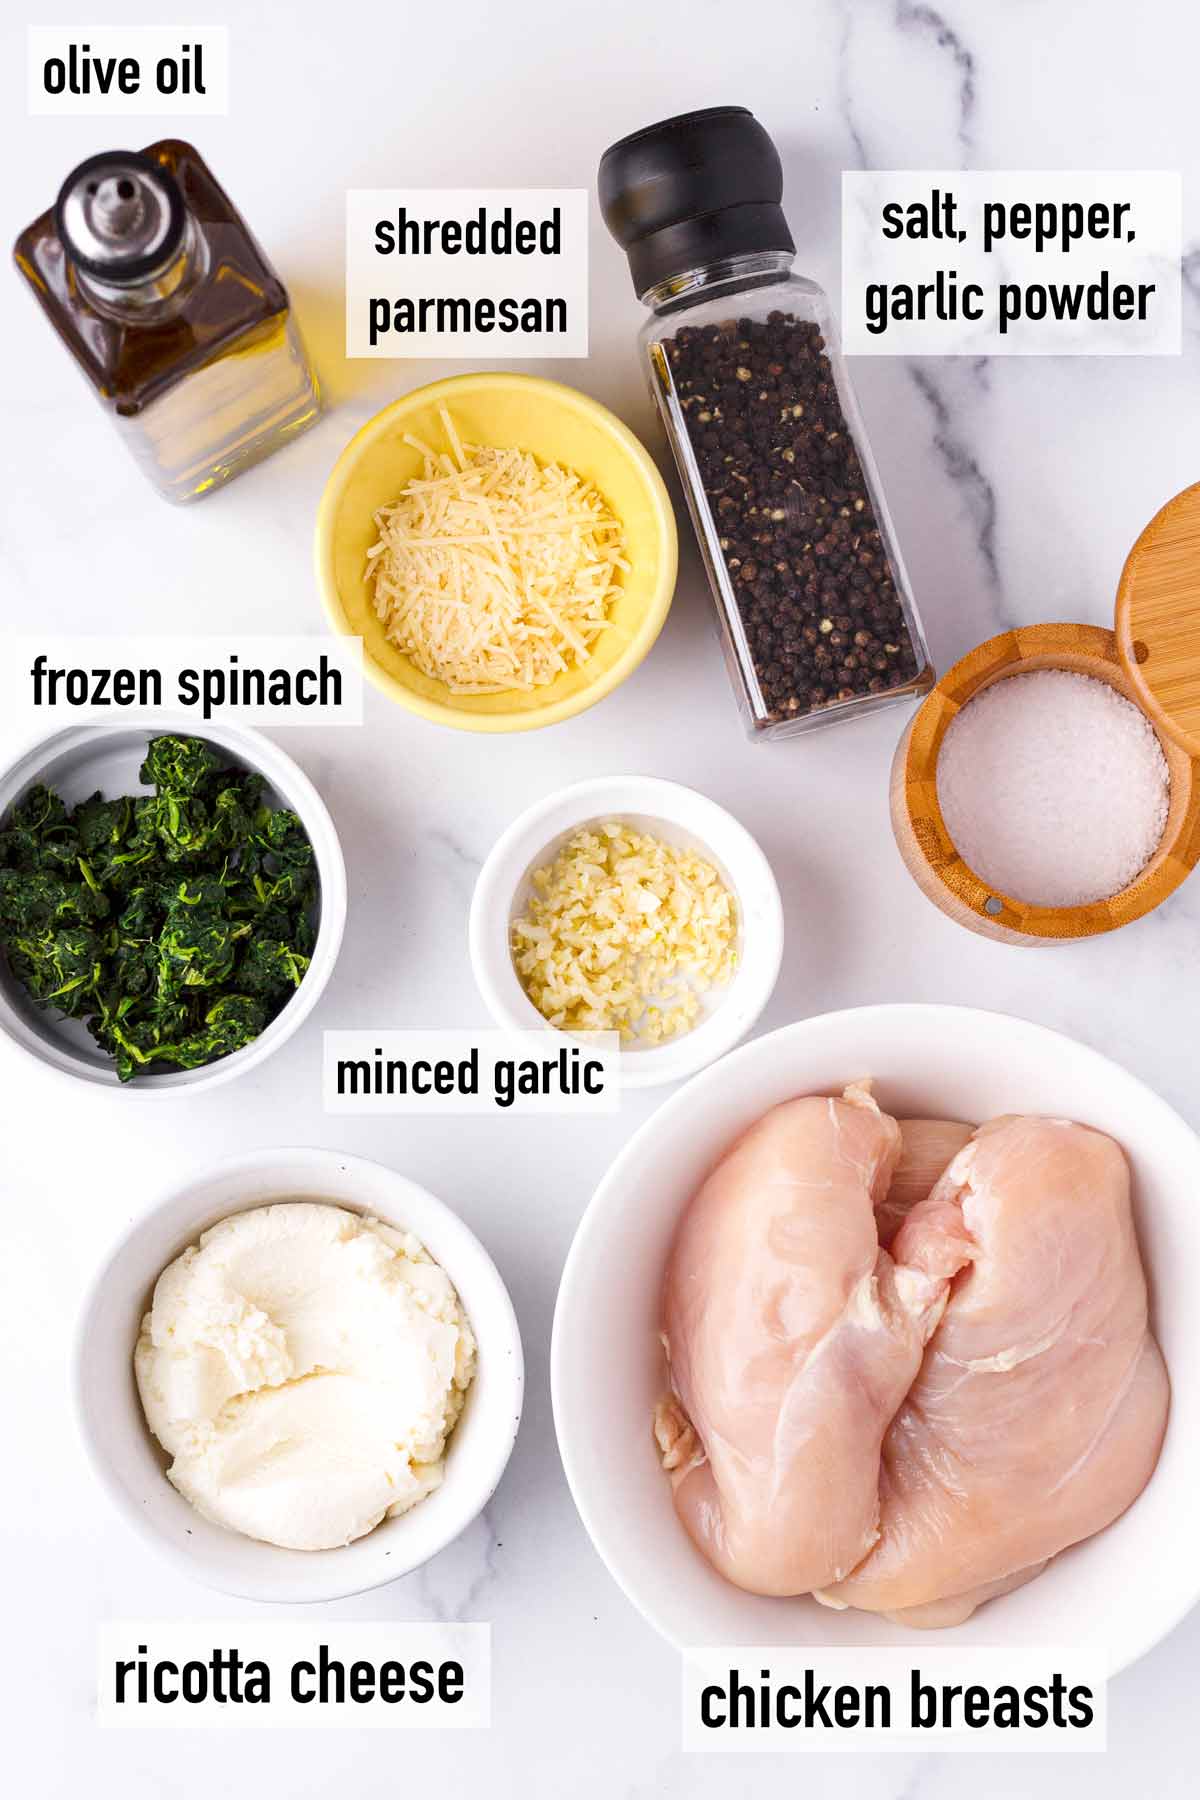 labeled ingredients to make spinach and cheese stuffed chicken